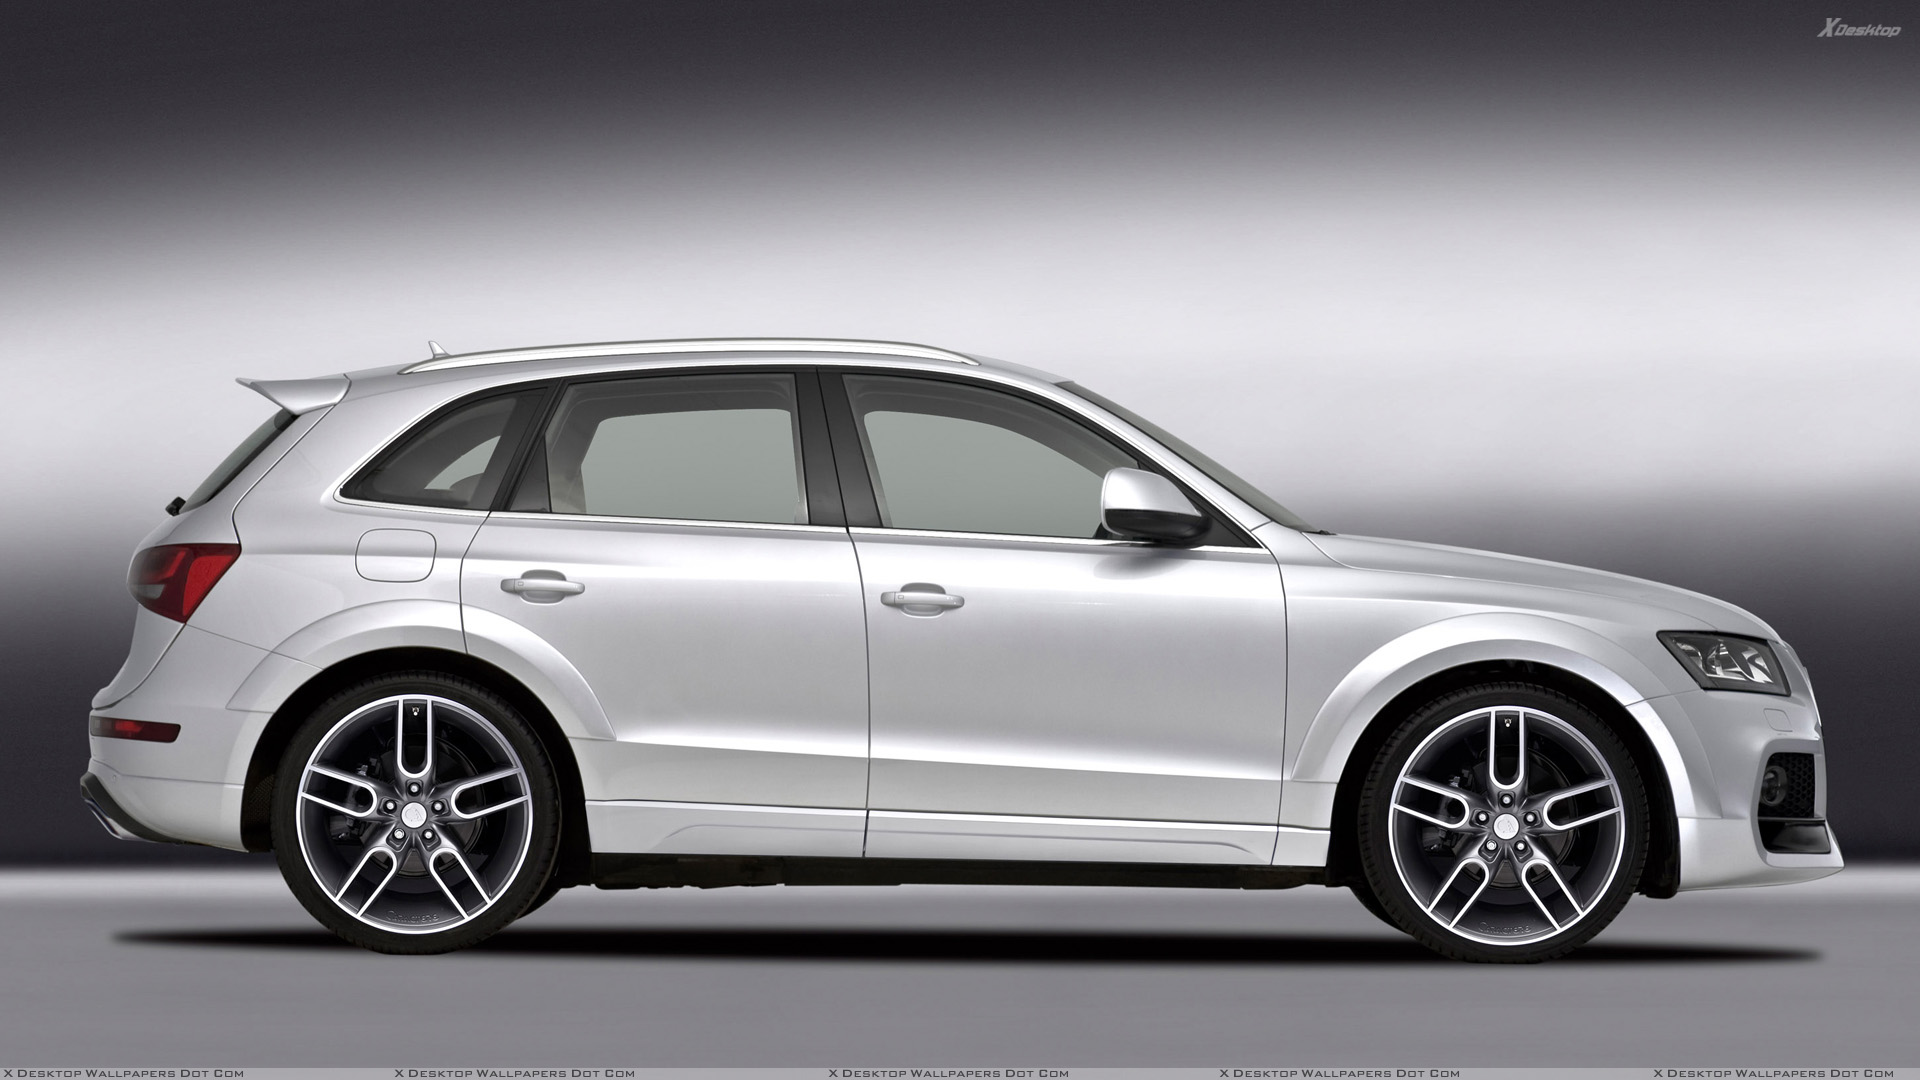 Audi Q5 Wallpapers, Photos & Images in HD